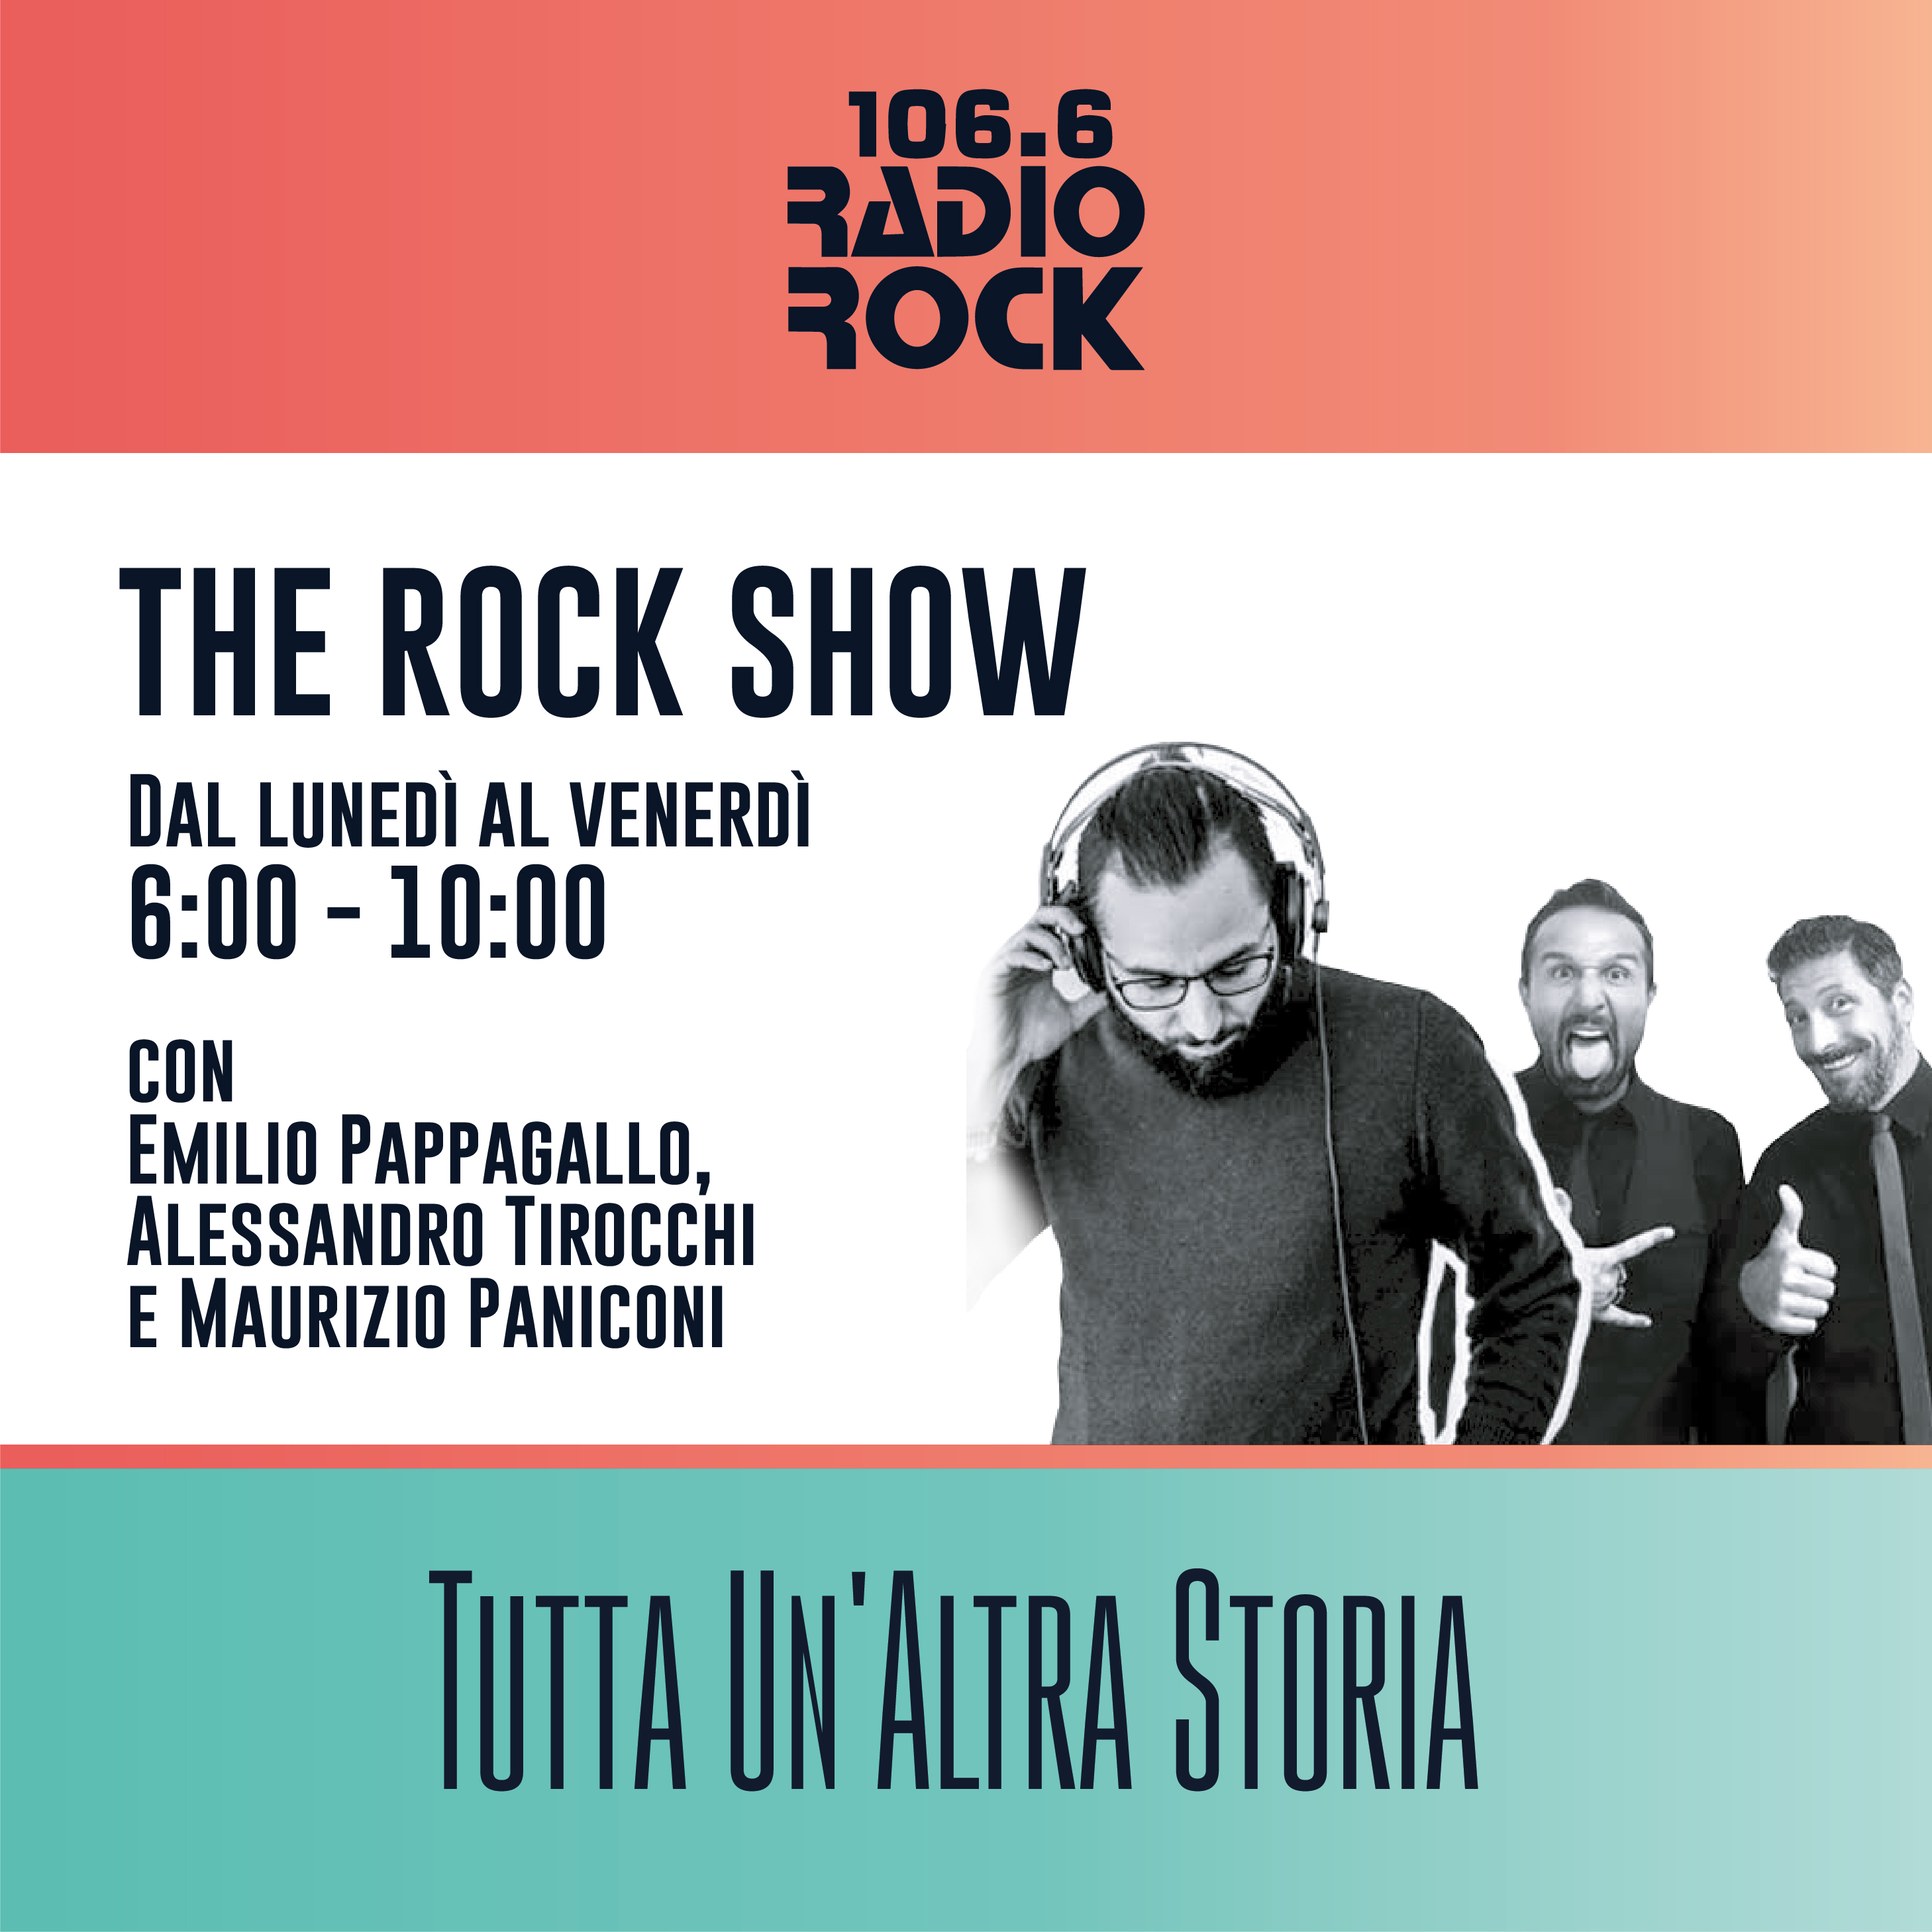 The Rock Show: Sesso senza amore (26-01-21)